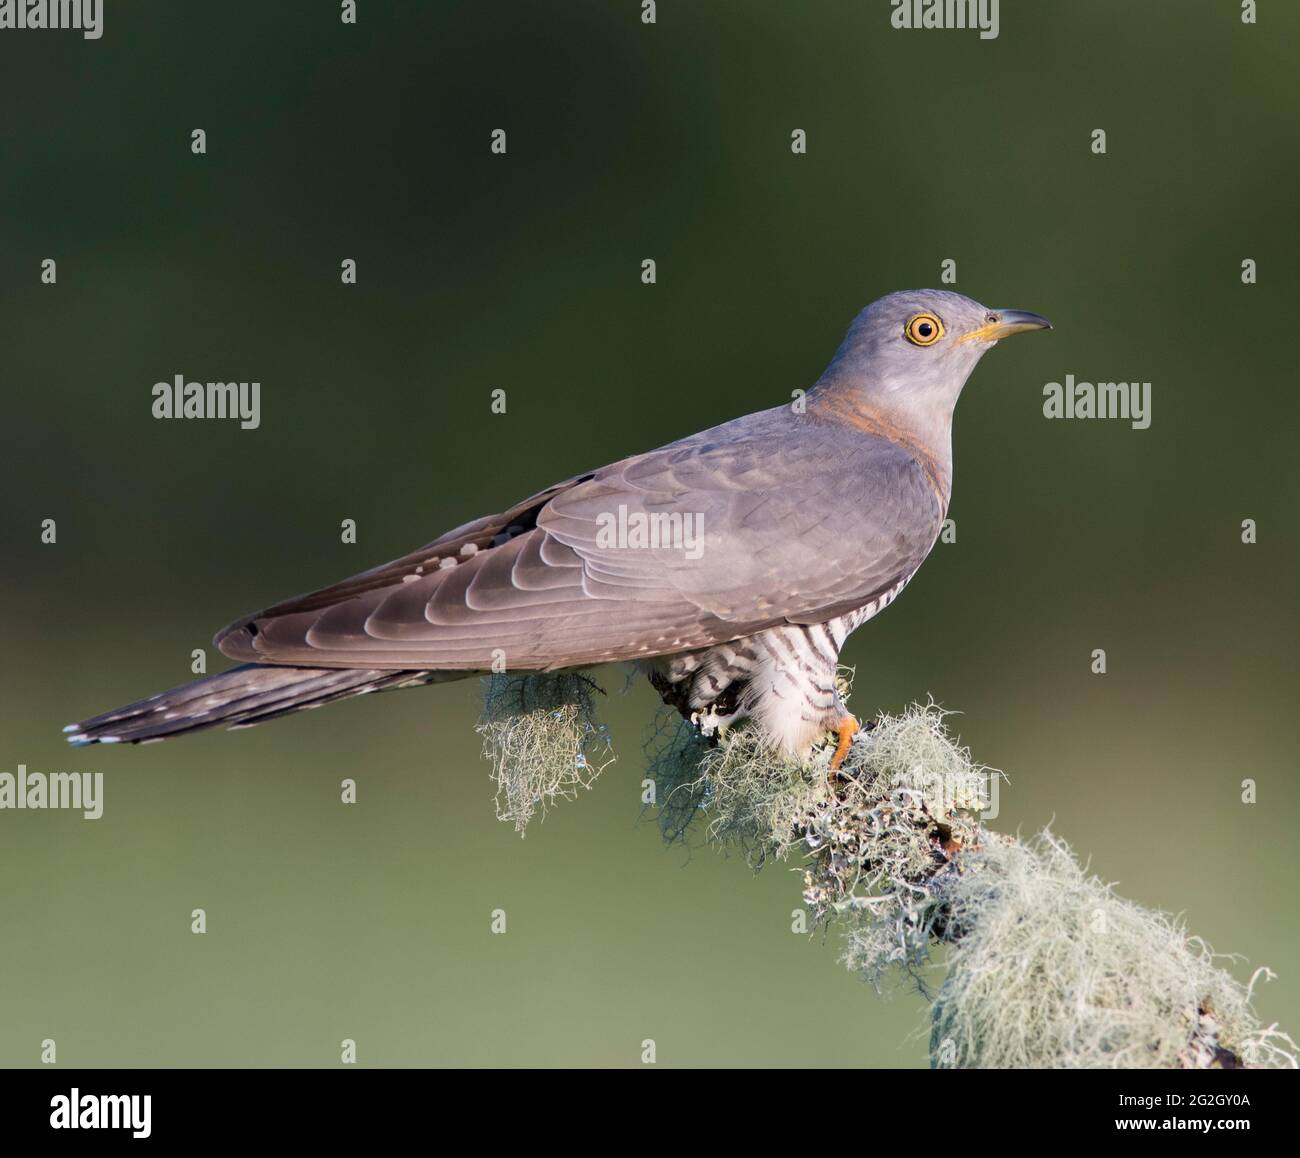 Female Common Cuckoo (Cuculus canorus) sat on a perch in good morning light. Stock Photo